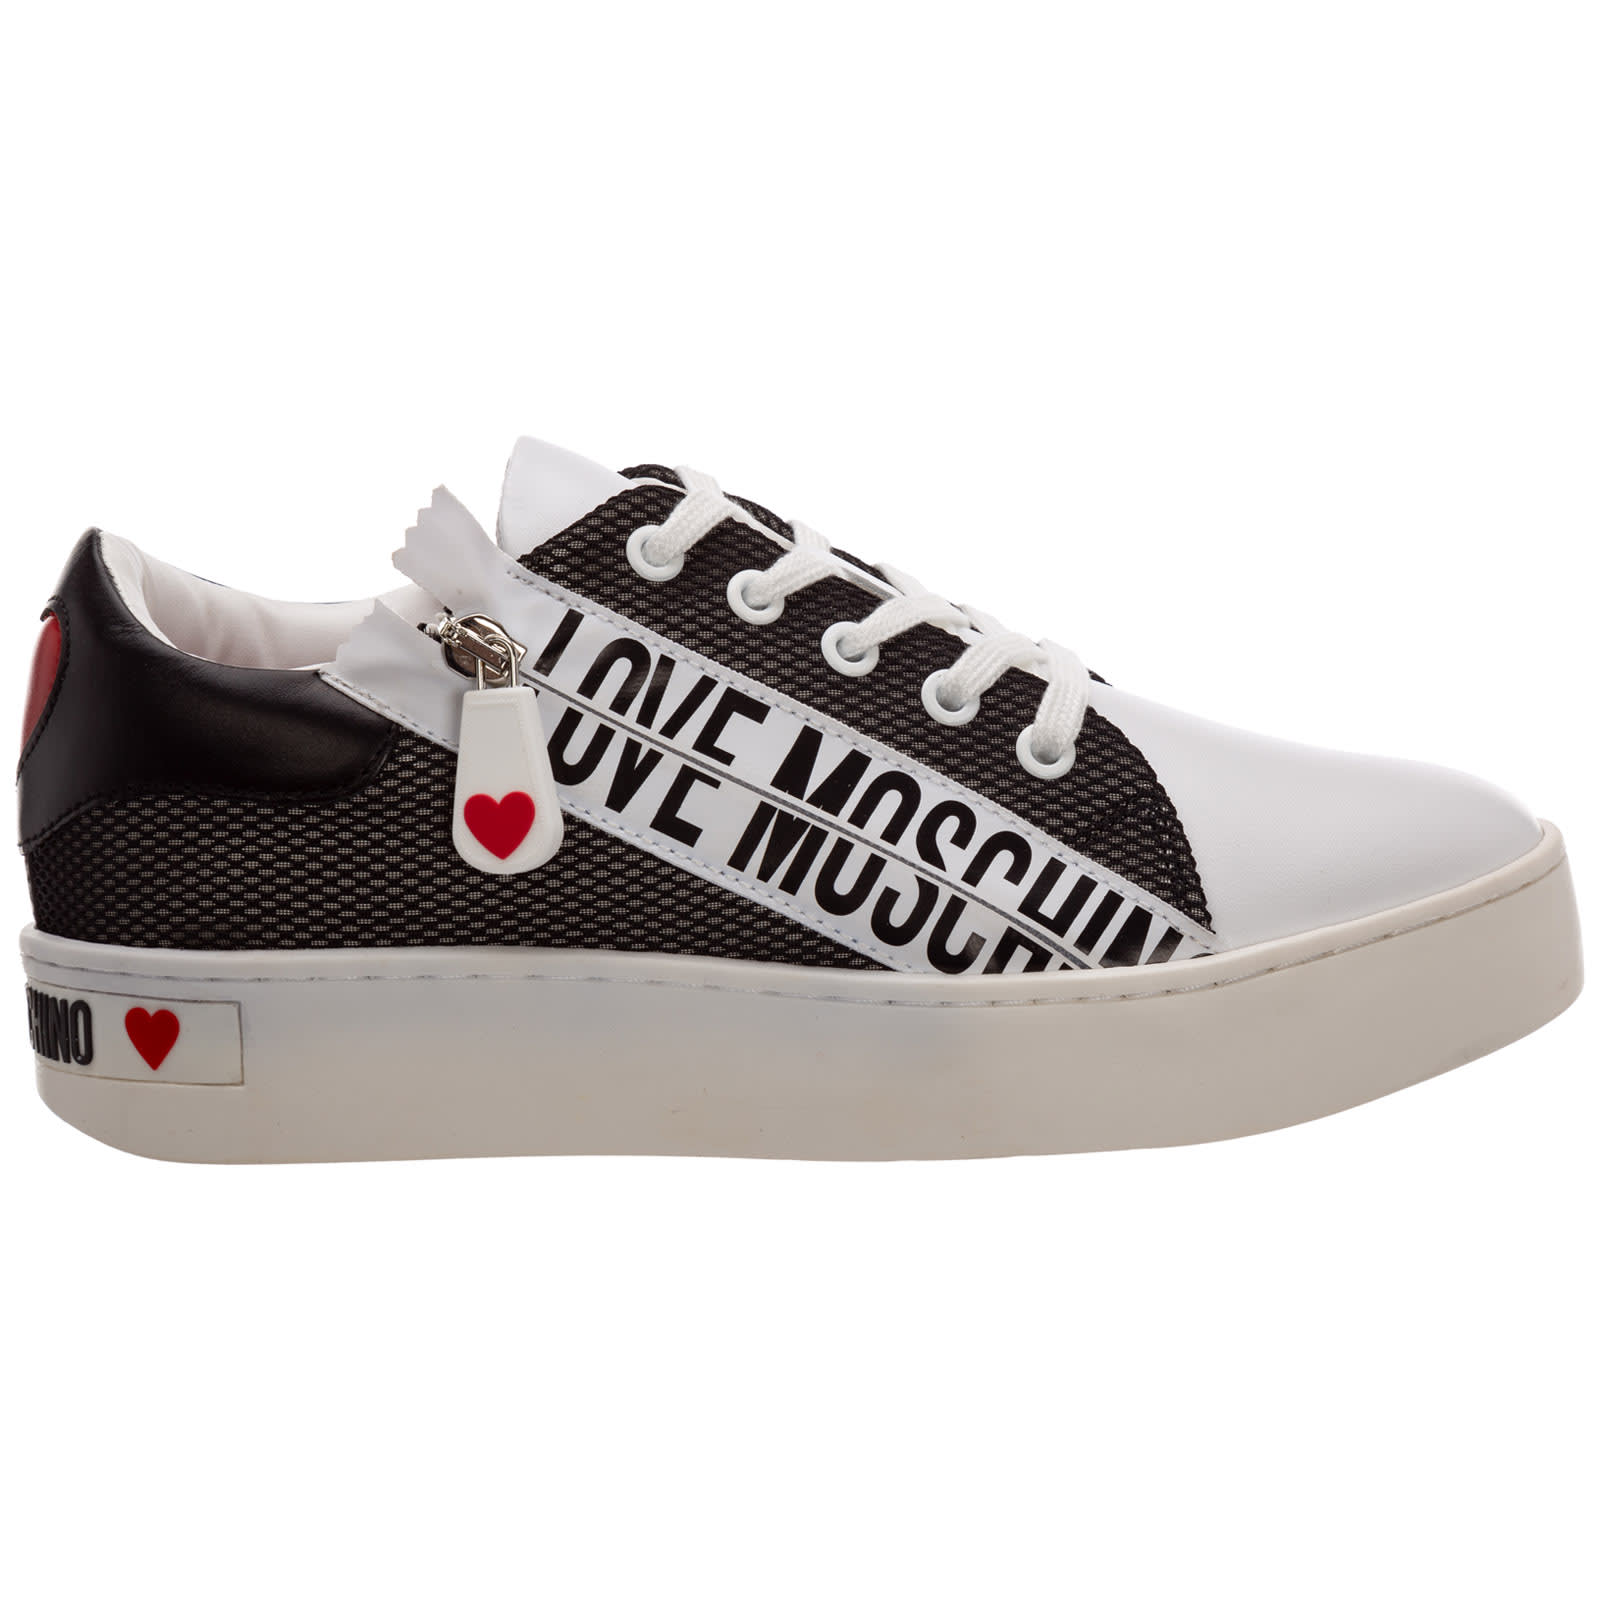 Buy Love Moschino Dreaming Sneakers online, shop Love Moschino shoes with free shipping